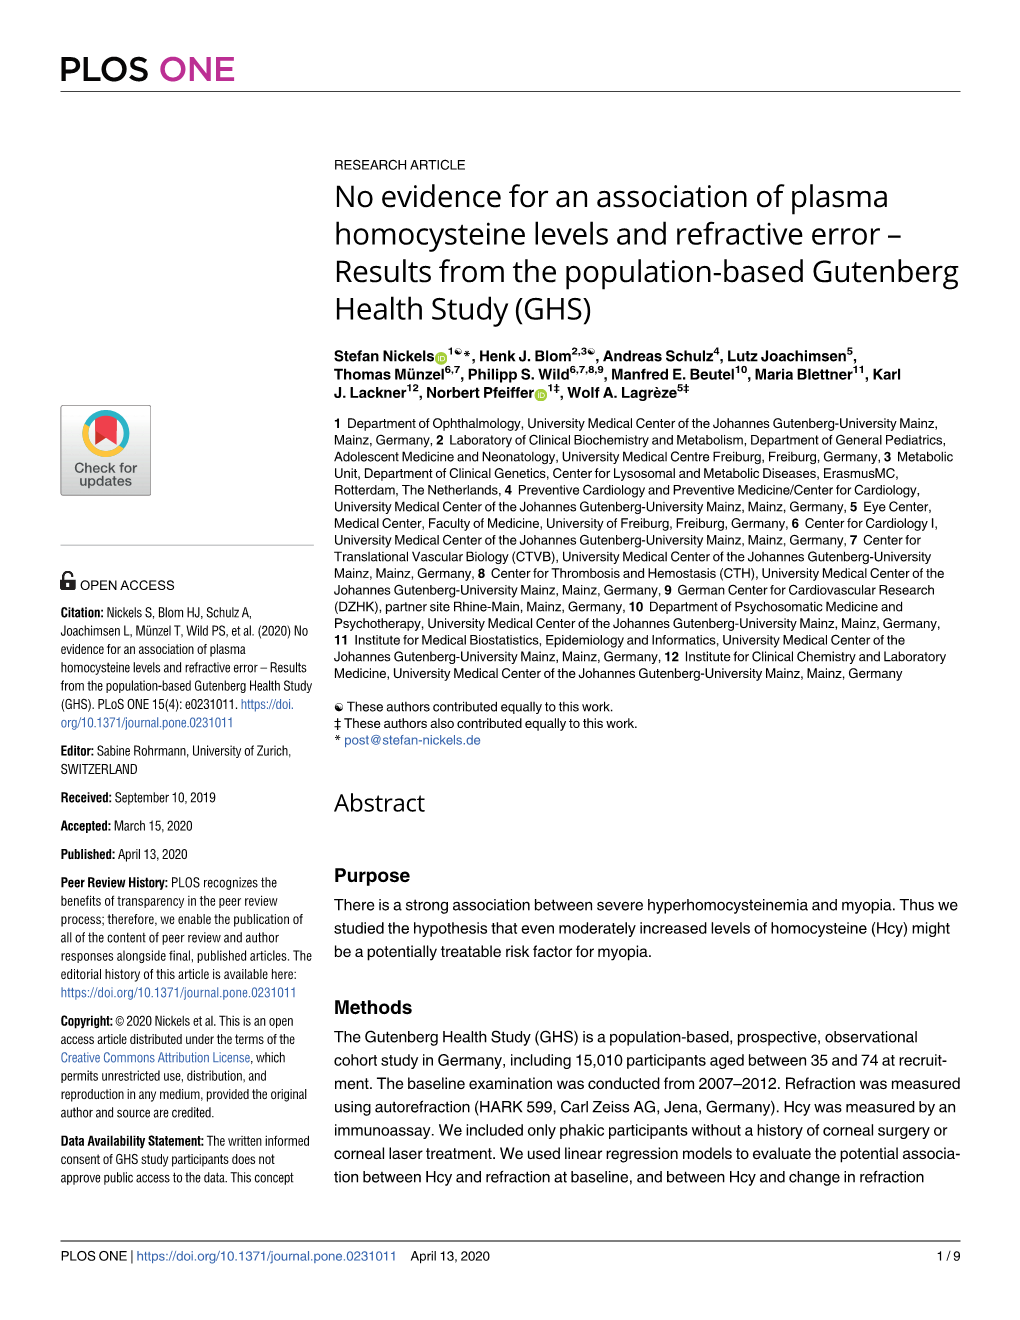 No Evidence for an Association of Plasma Homocysteine Levels and Refractive Error – Results from the Population-Based Gutenberg Health Study (GHS)